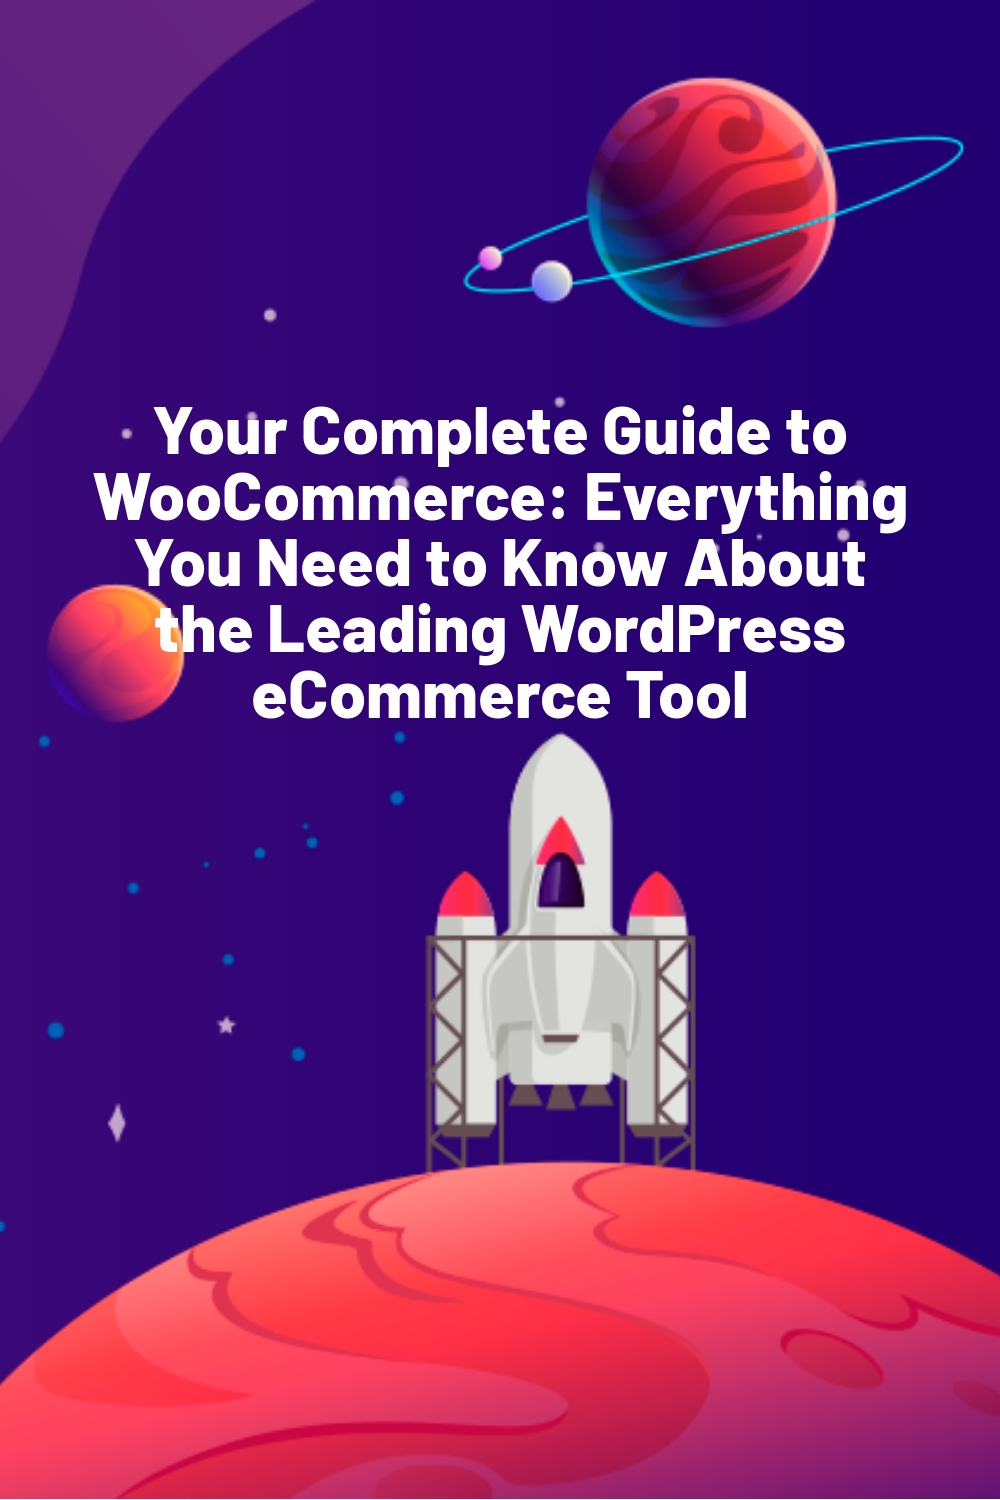 Your Complete Guide to WooCommerce: Everything You Need to Know About the Leading WordPress eCommerce Tool